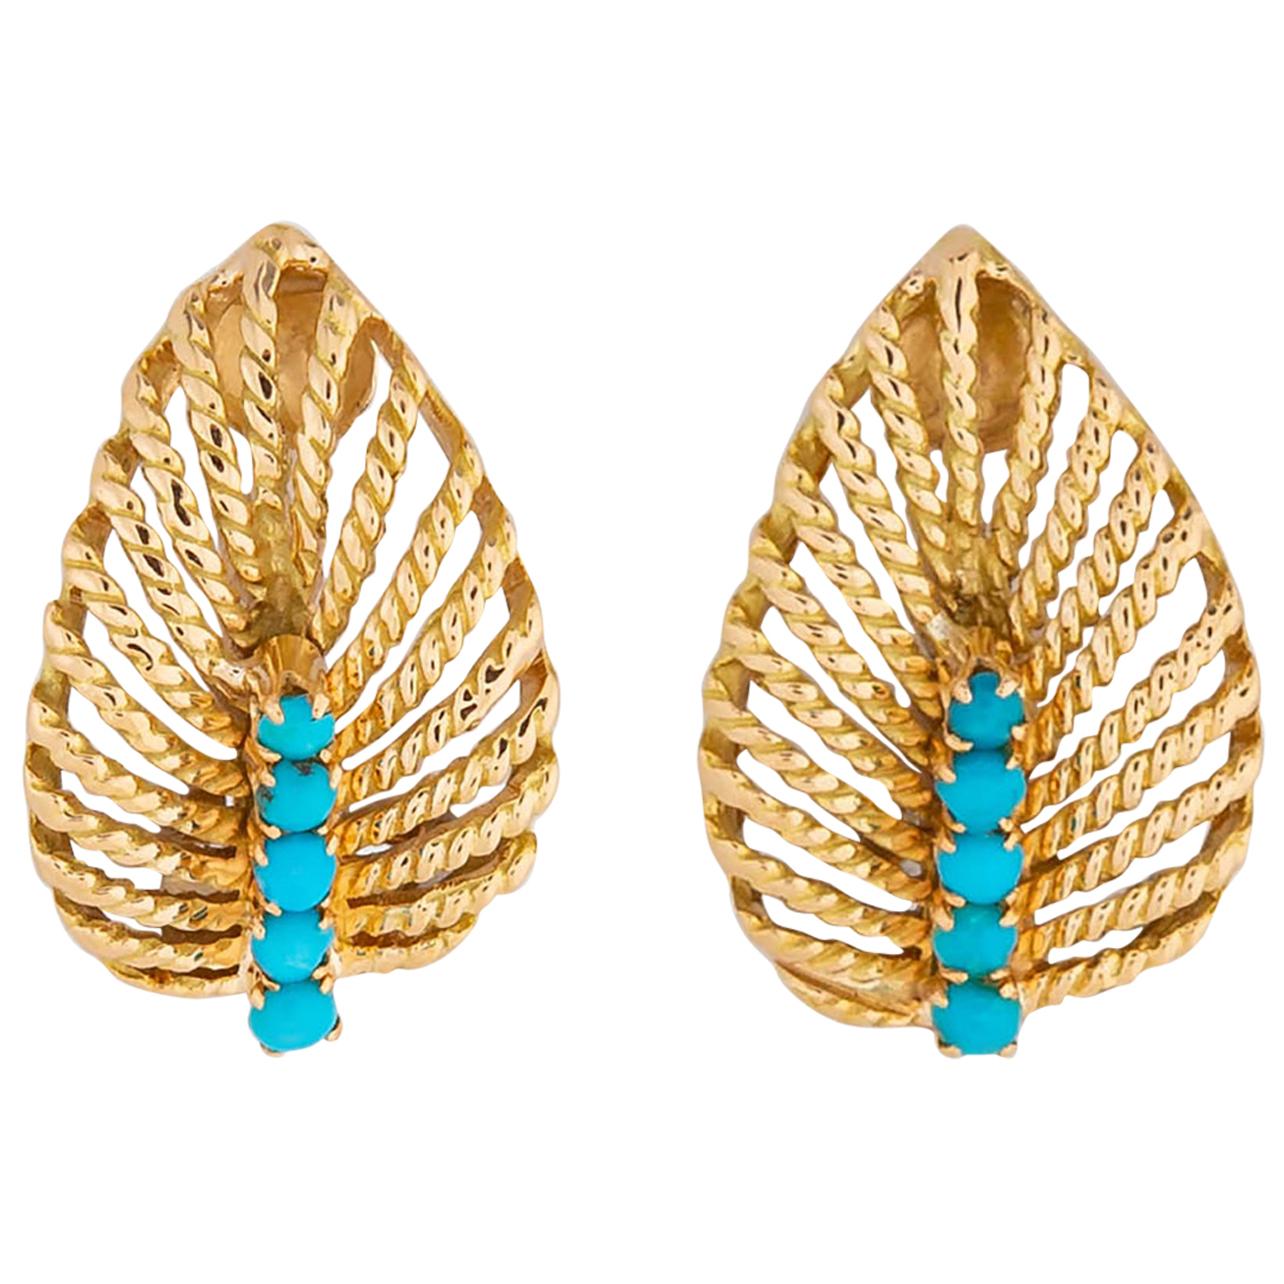 Elegant Gold and Turquoise Leaf Motif Earrings For Sale